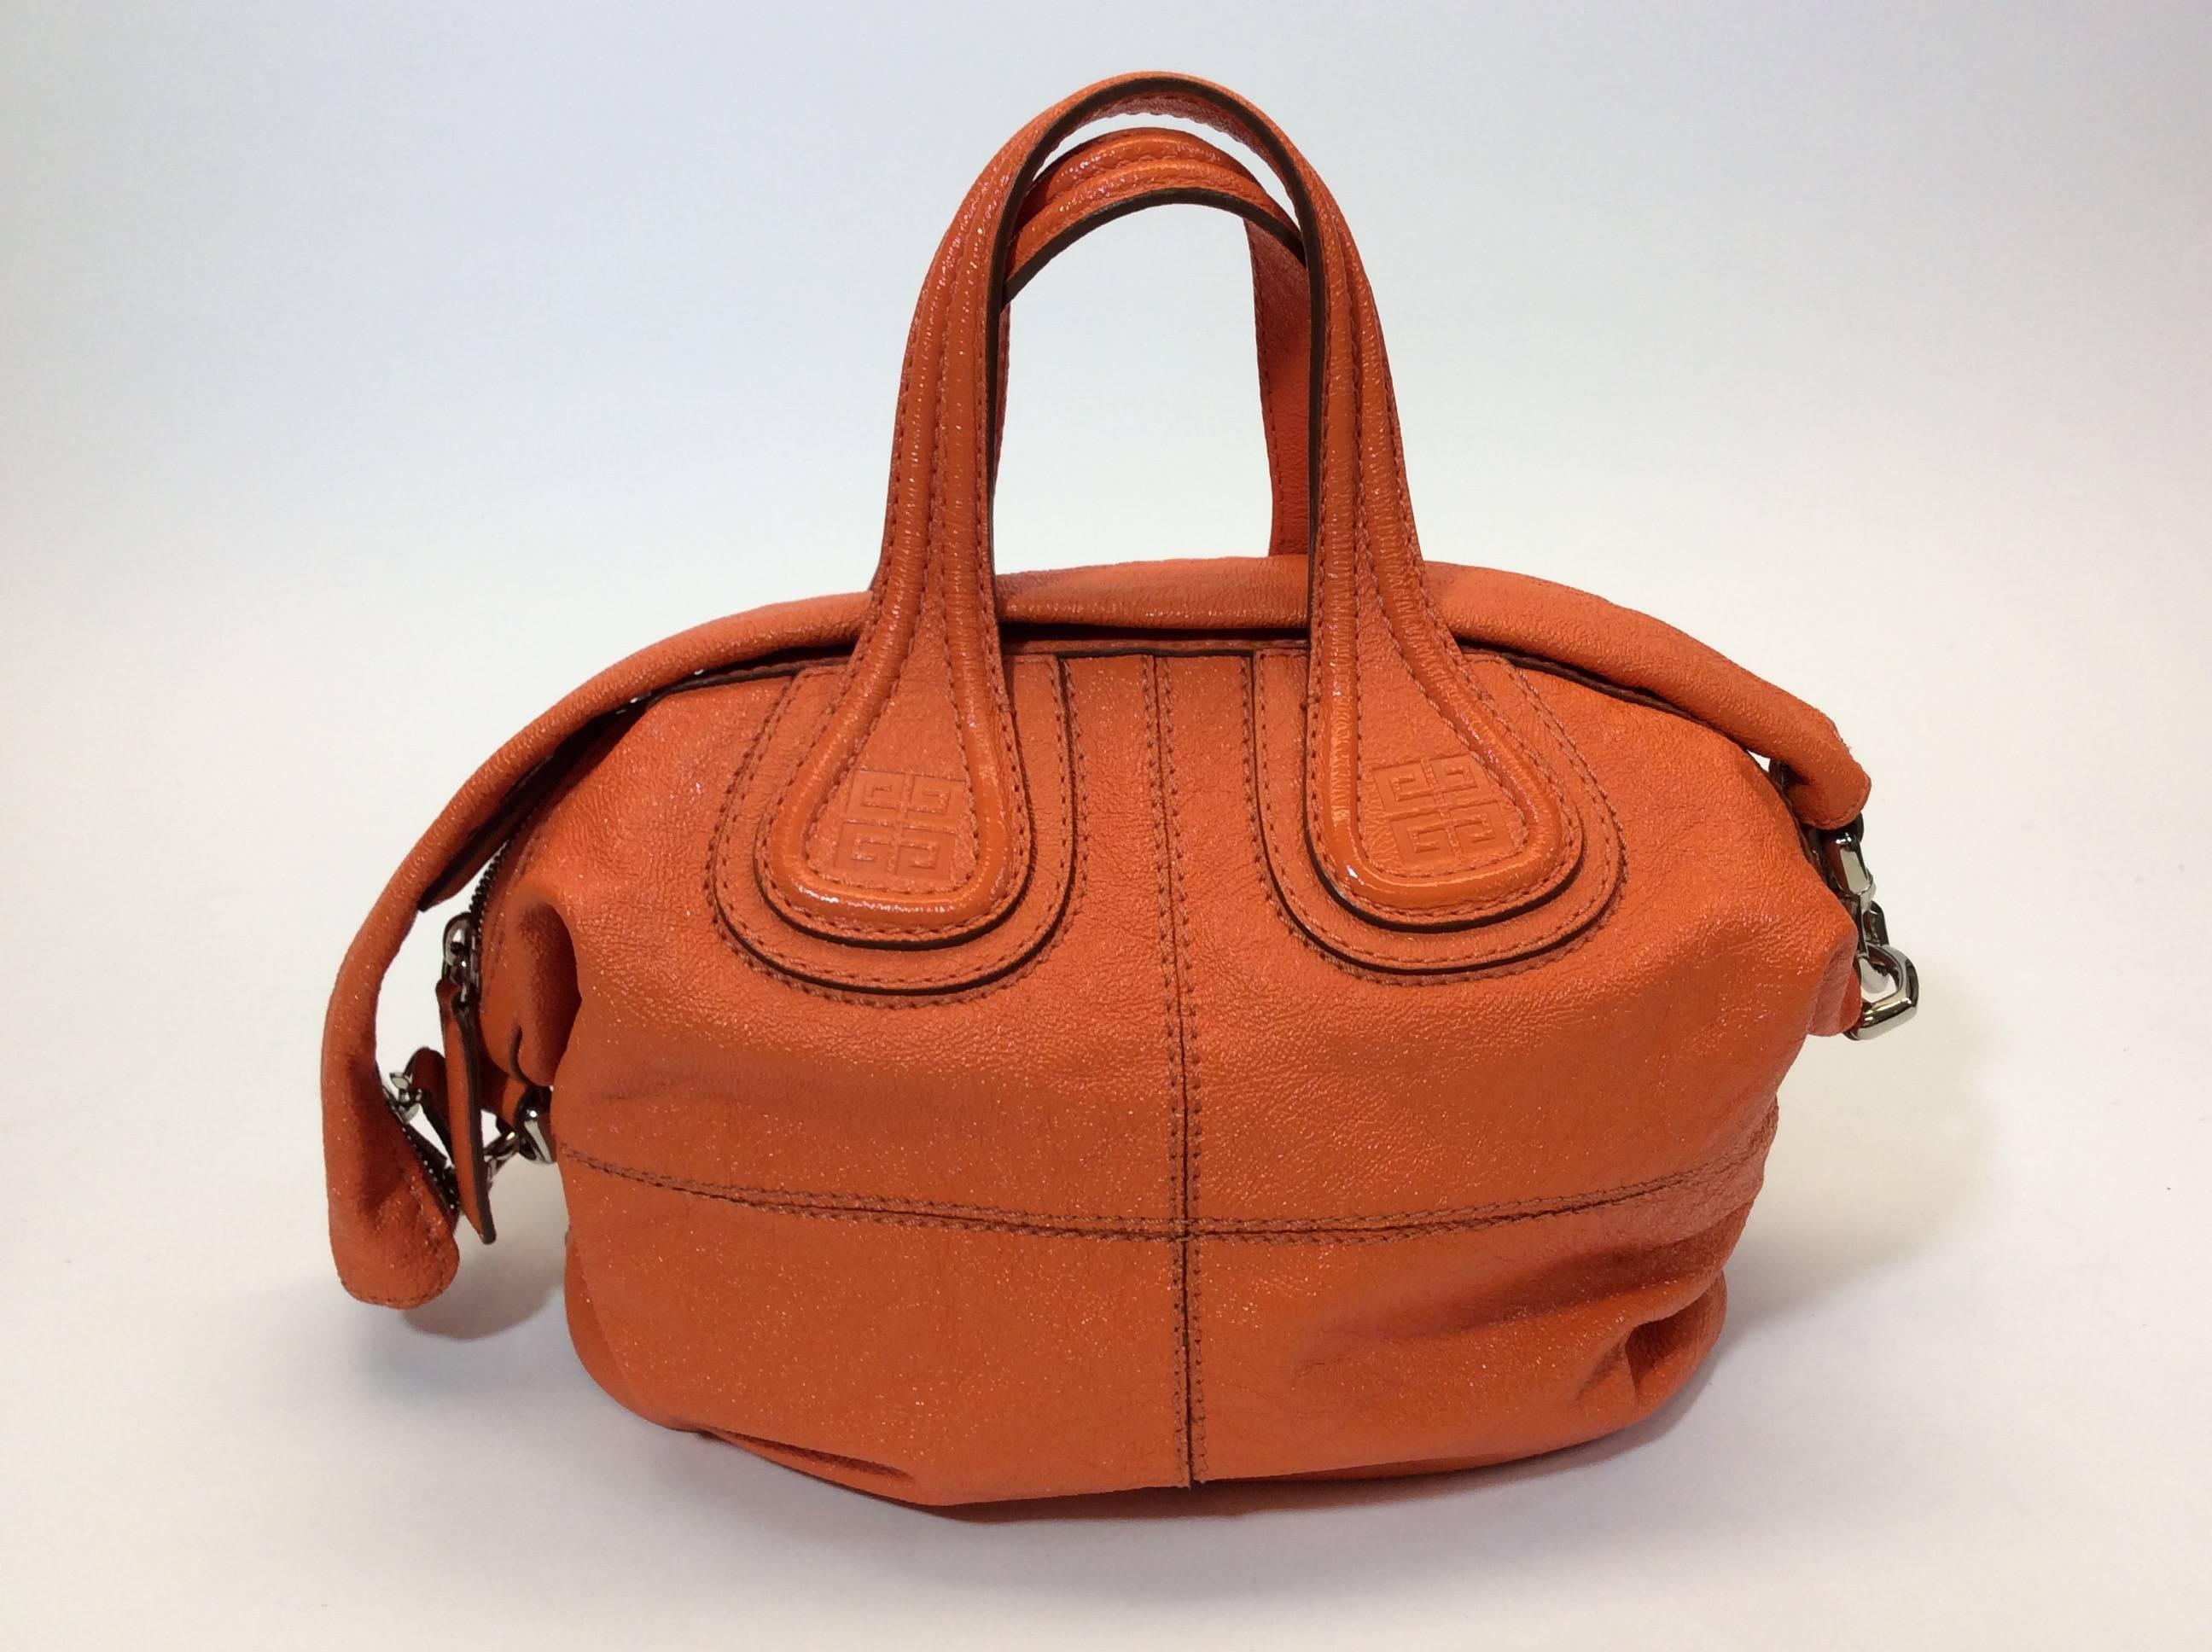 Givenchy Orange Leather Hobo Bag In Excellent Condition For Sale In Narberth, PA